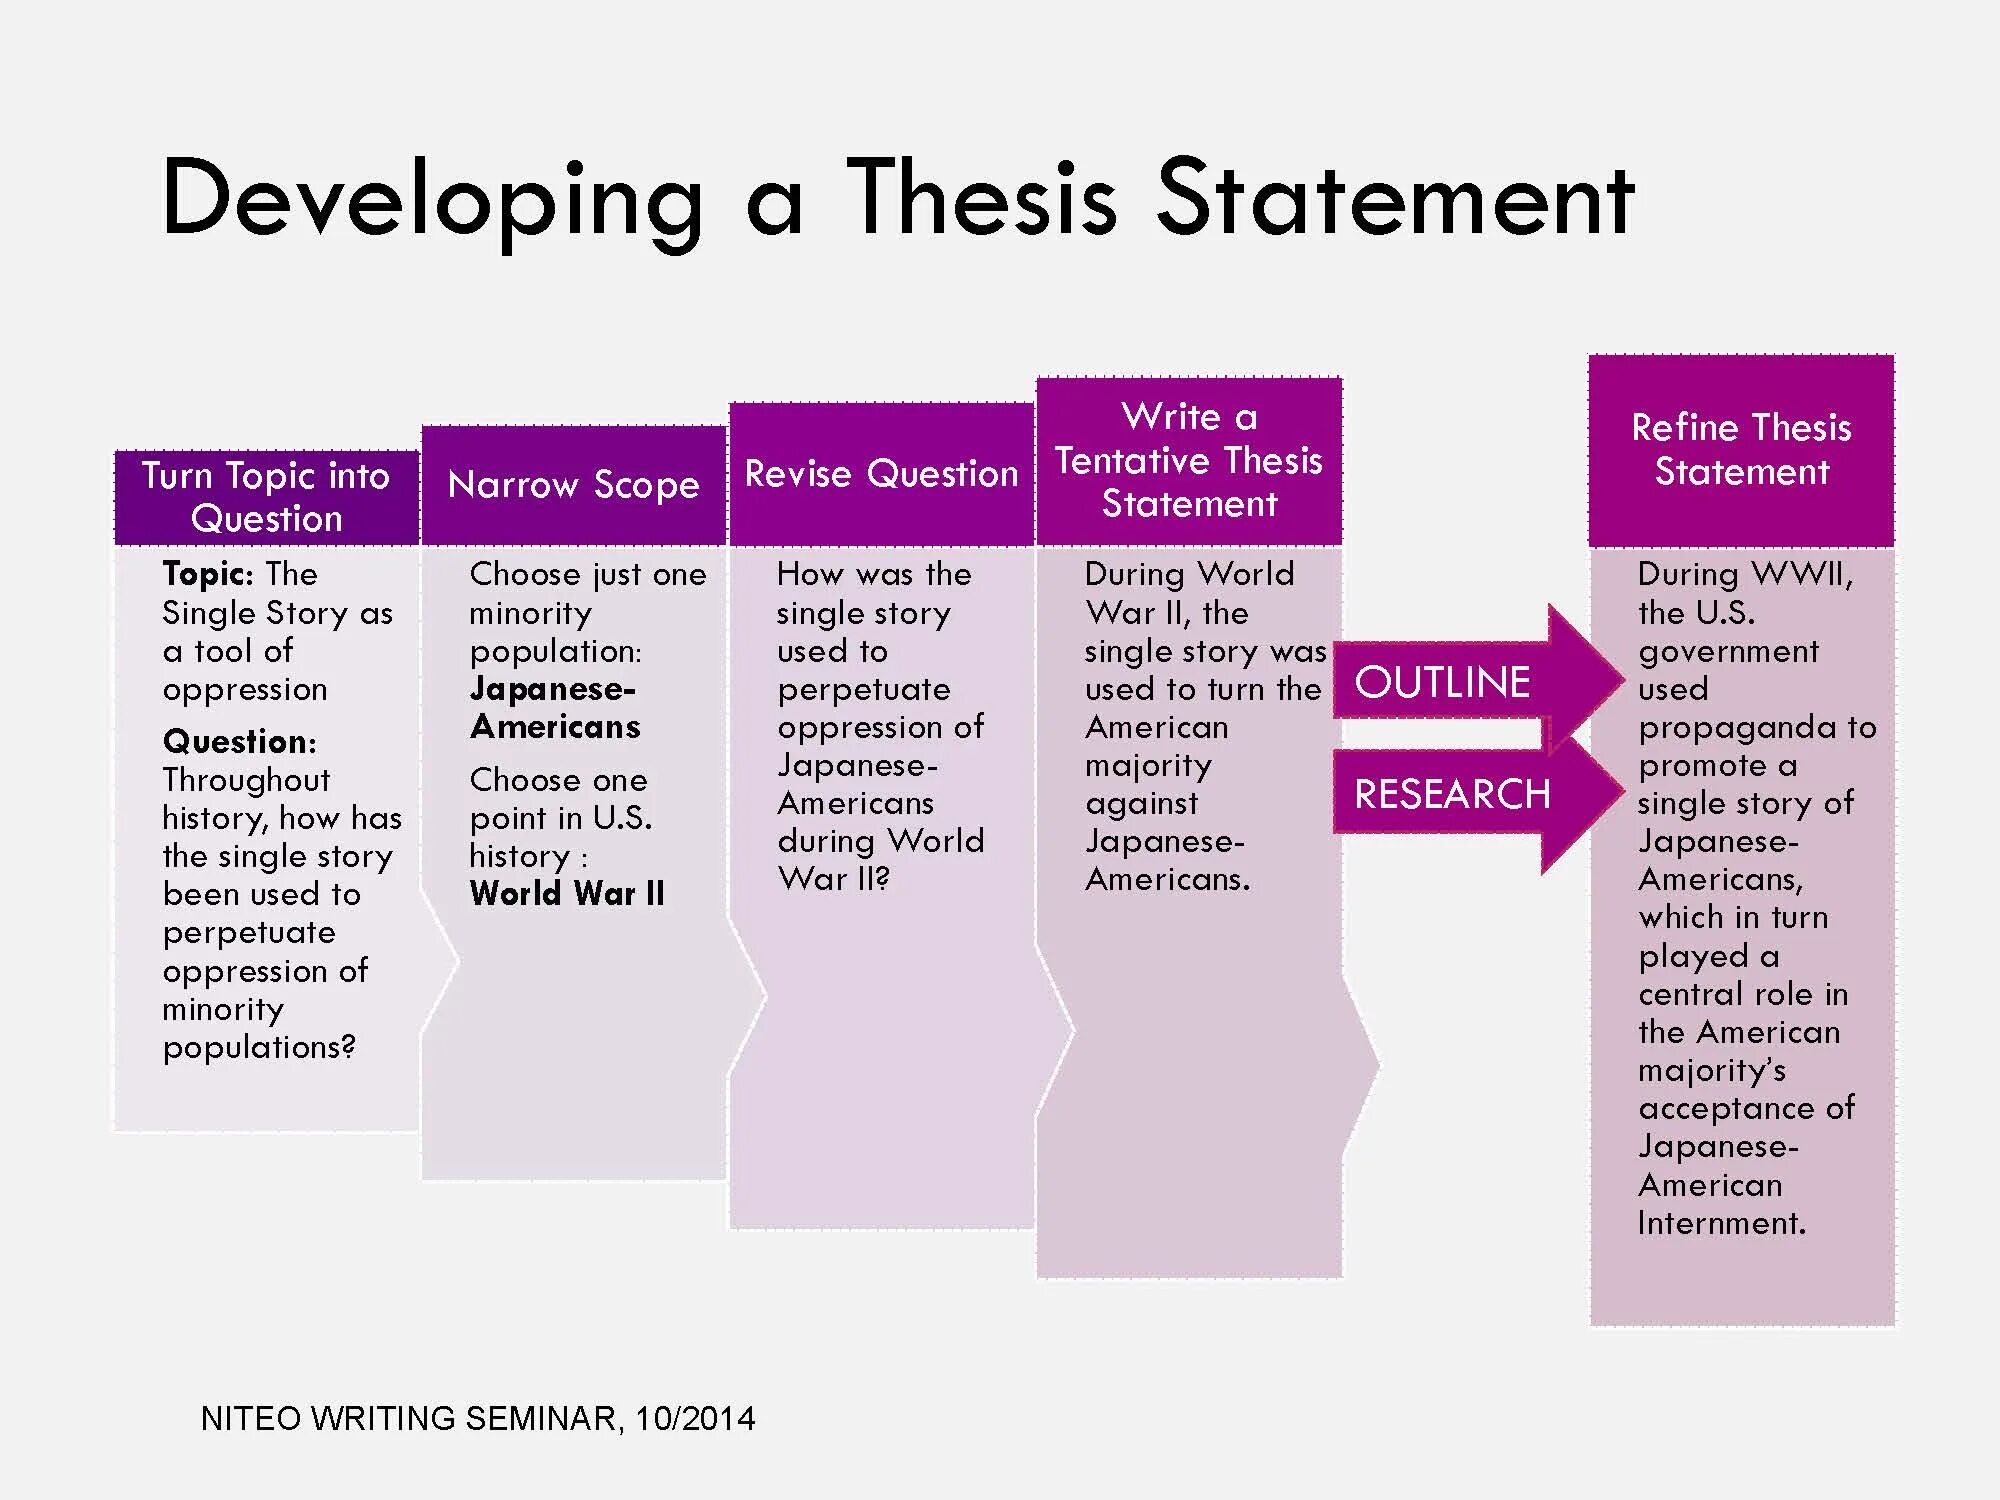 Thesis Statement. How to write a thesis Statement. What is thesis Statement. Research Statement пример. Statement is over